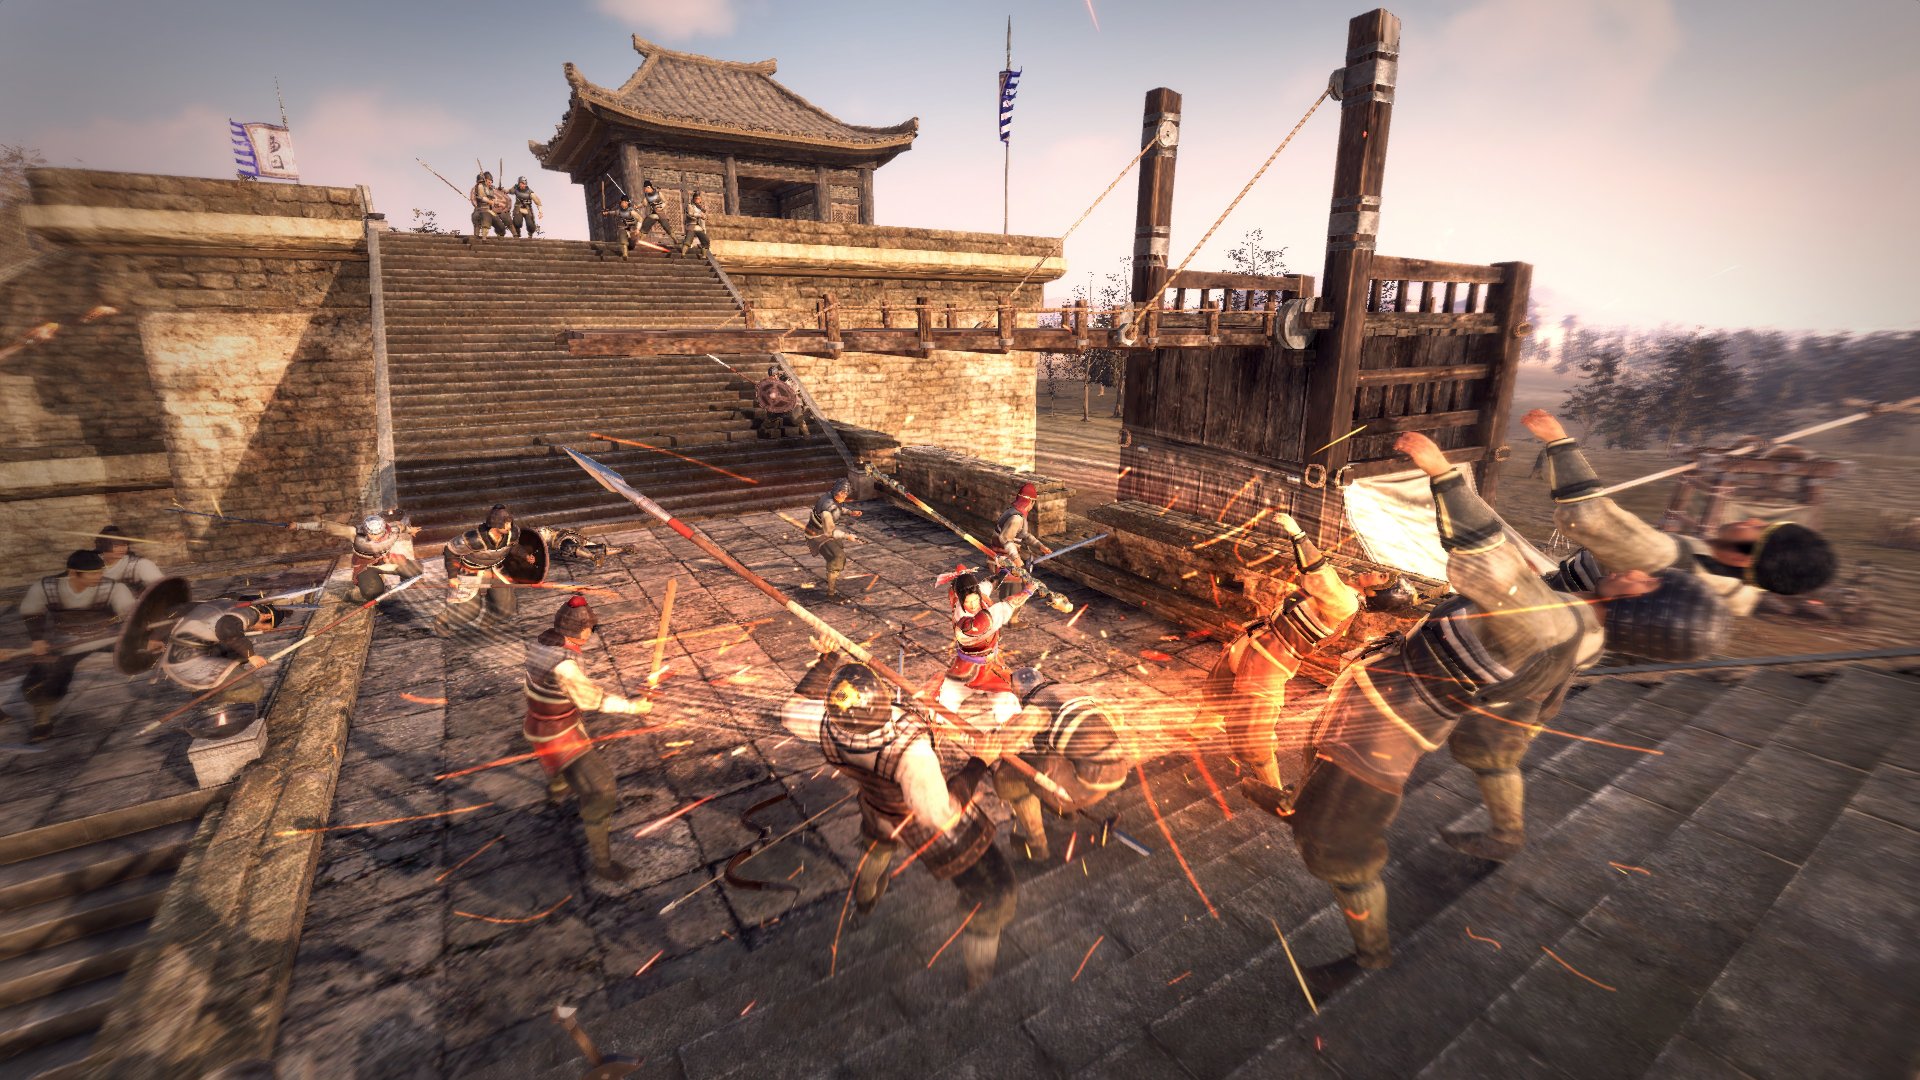 Dynasty Warriors 9 Empires, Dynasty Warriors, release date, platforms, PS5, PS4, Xbox Series, Xbox One, Nintendo Switch, PC, trailer, features, Koei Tecmo